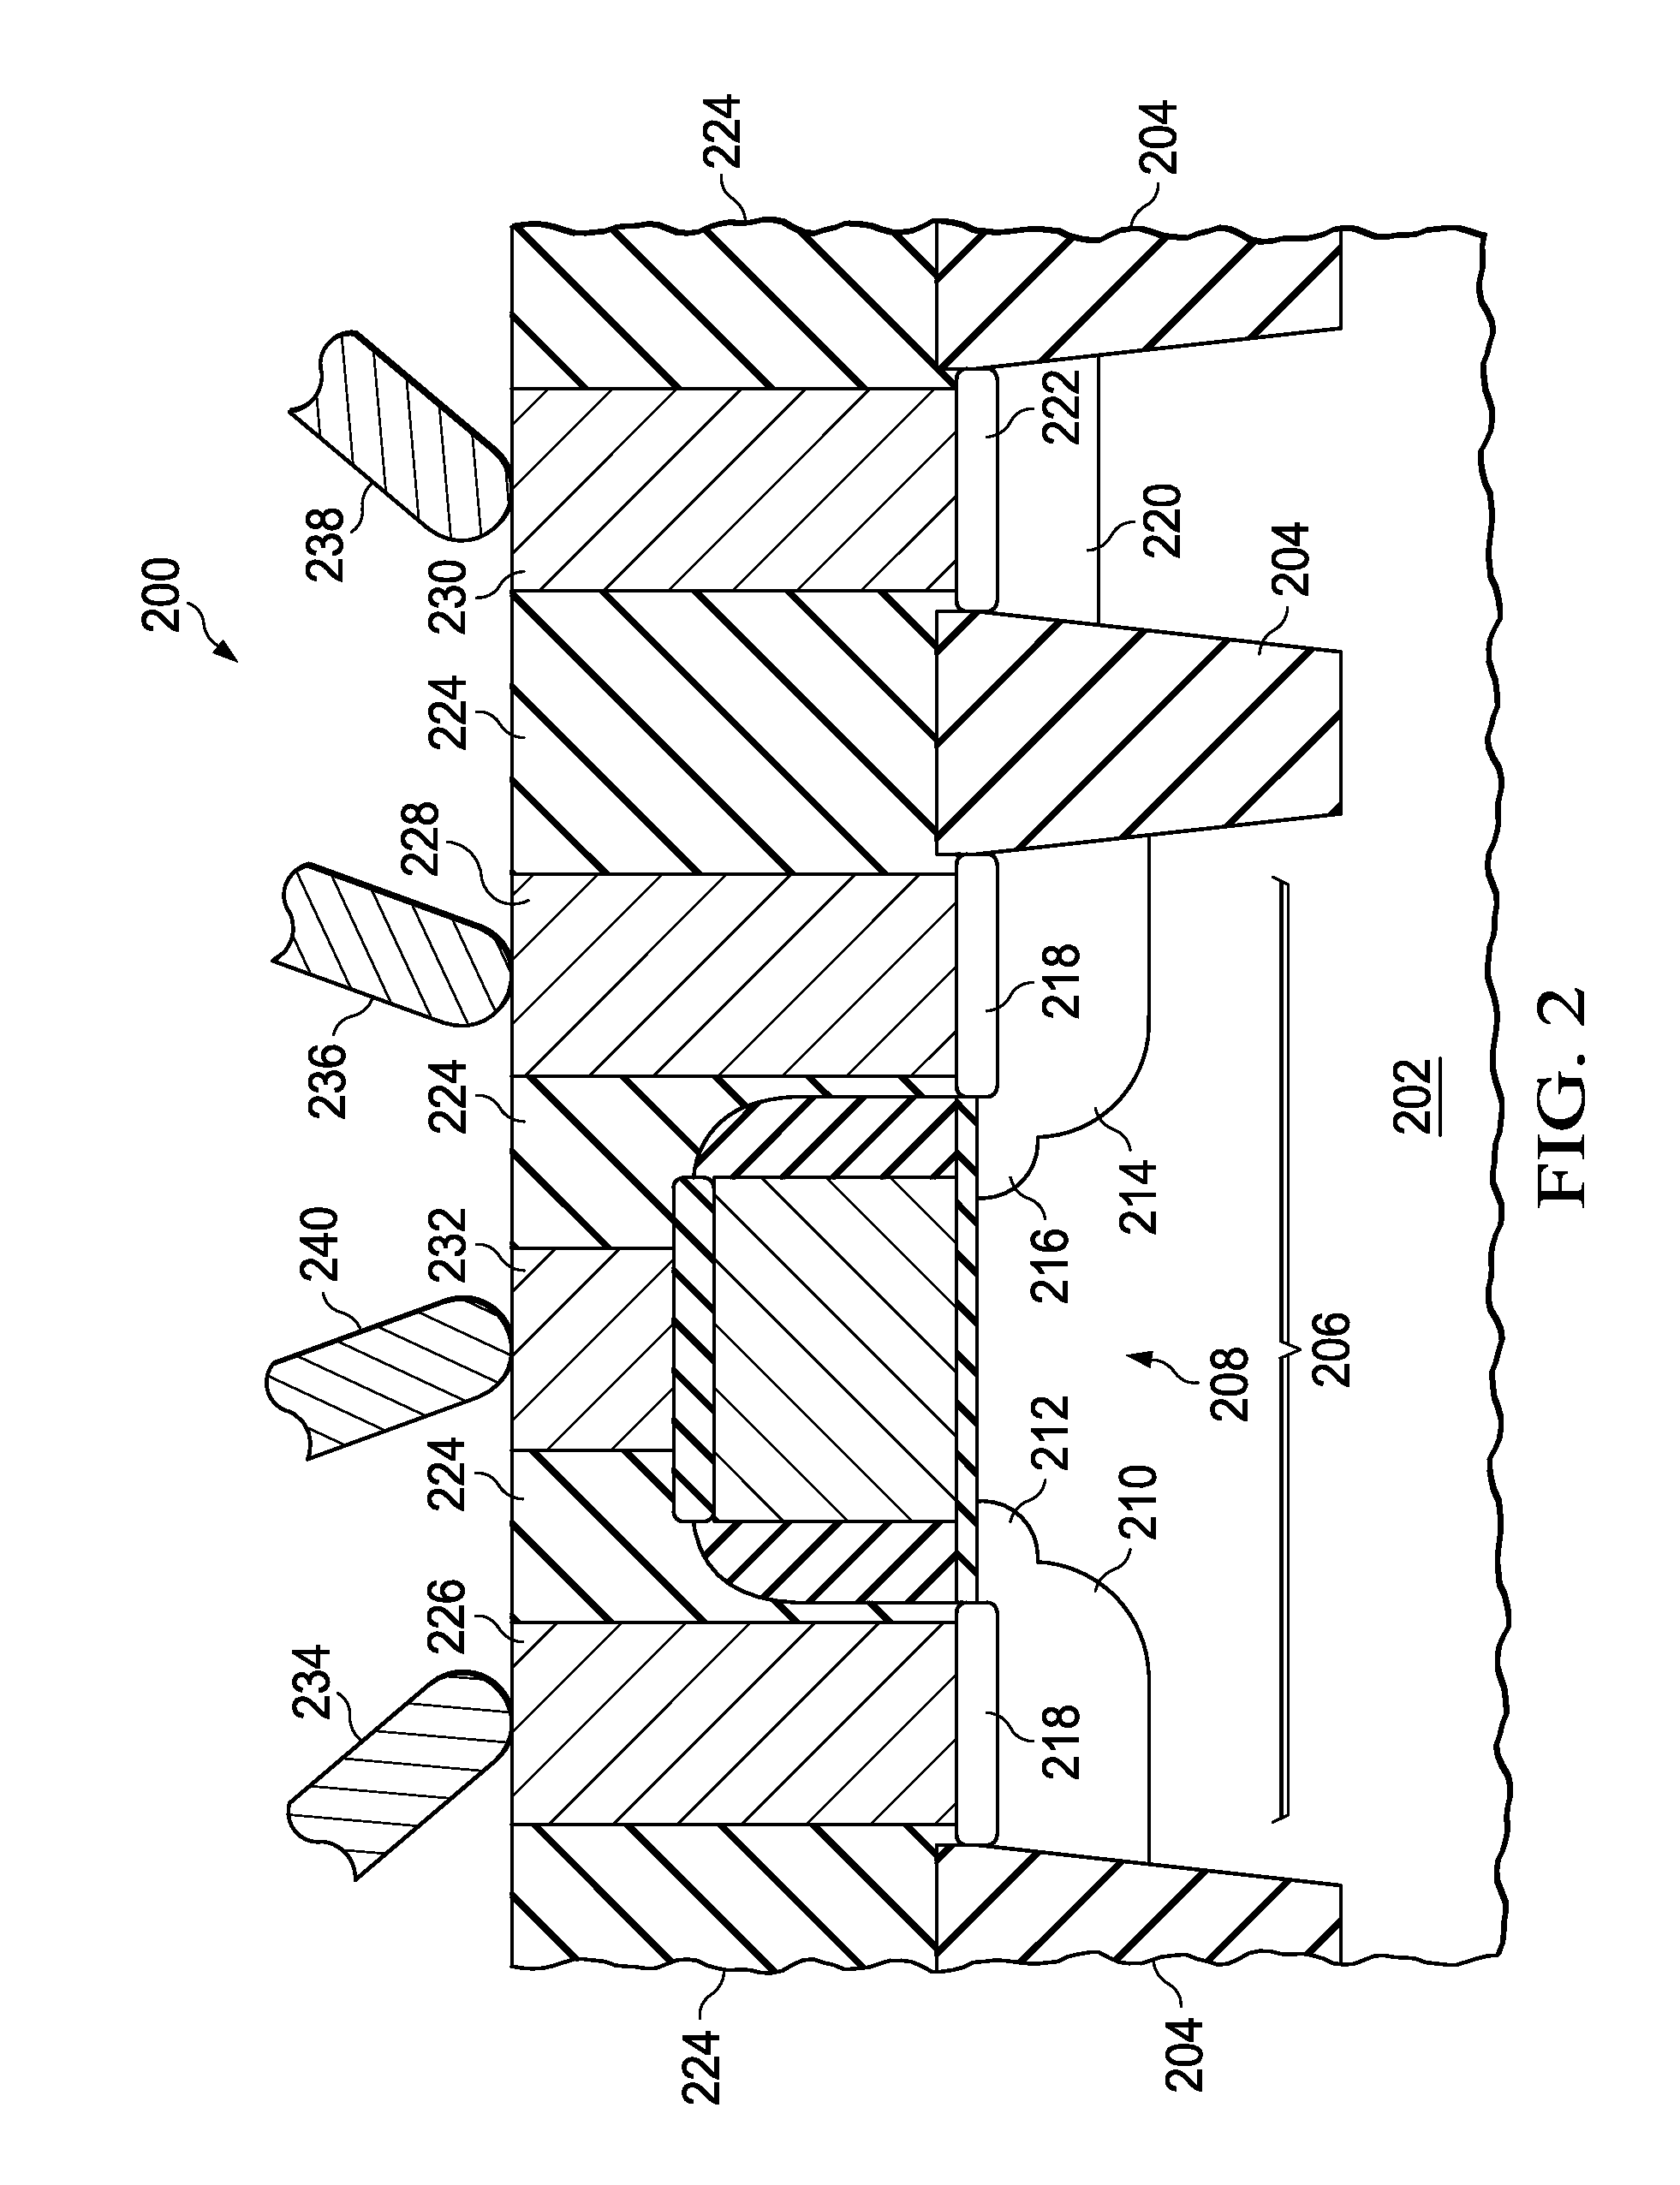 Method to Accurately Estimate the Source and Drain Resistance of a MOSFET